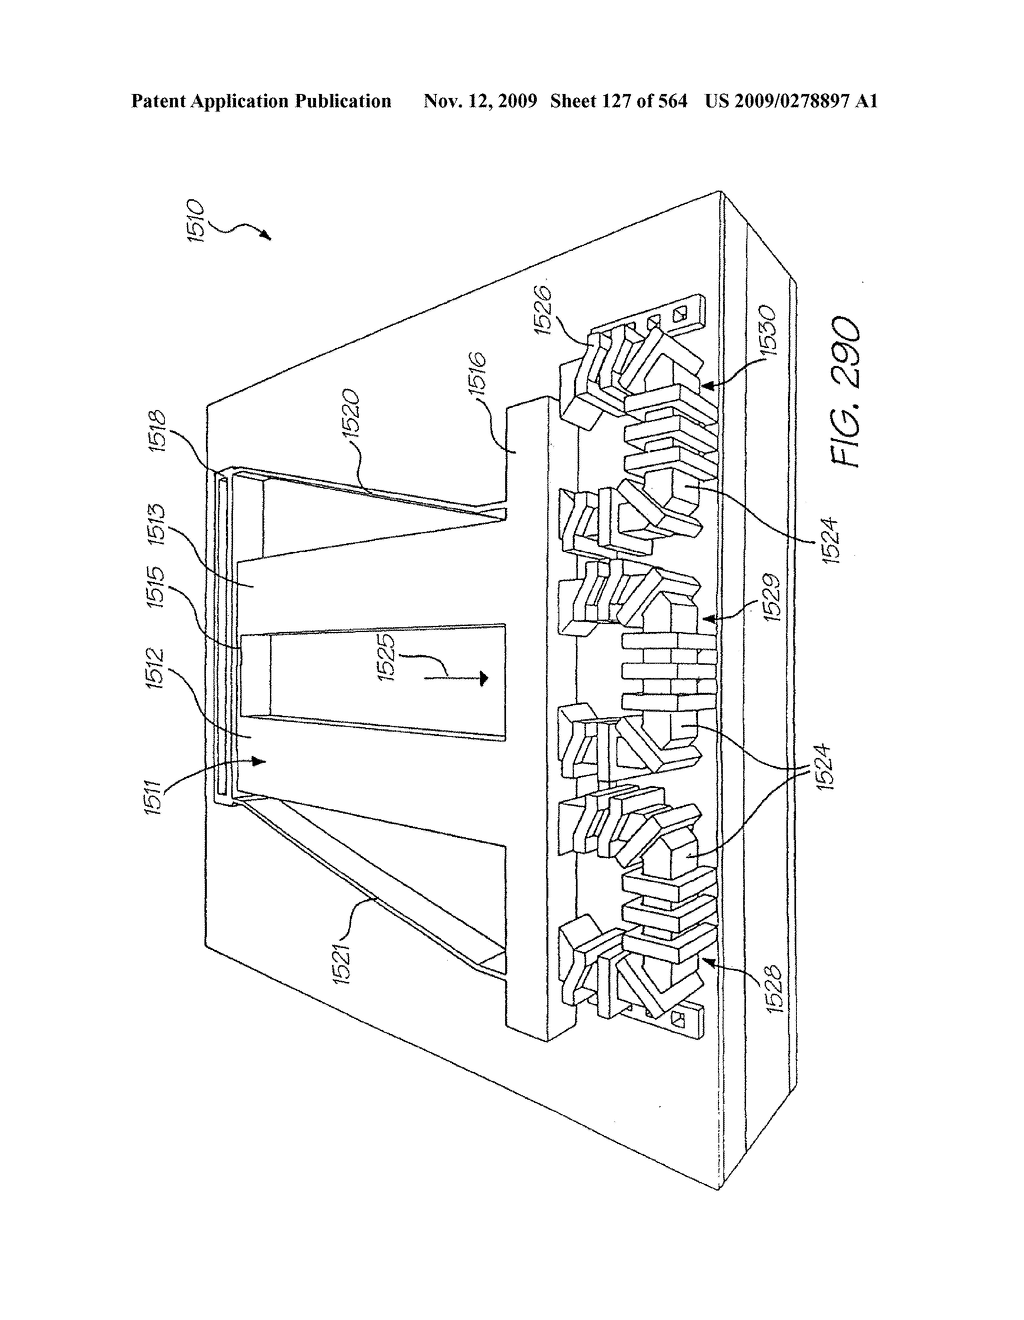 Inkjet Printhead With Nozzle Chambers Each Holding Two Fluids - diagram, schematic, and image 128